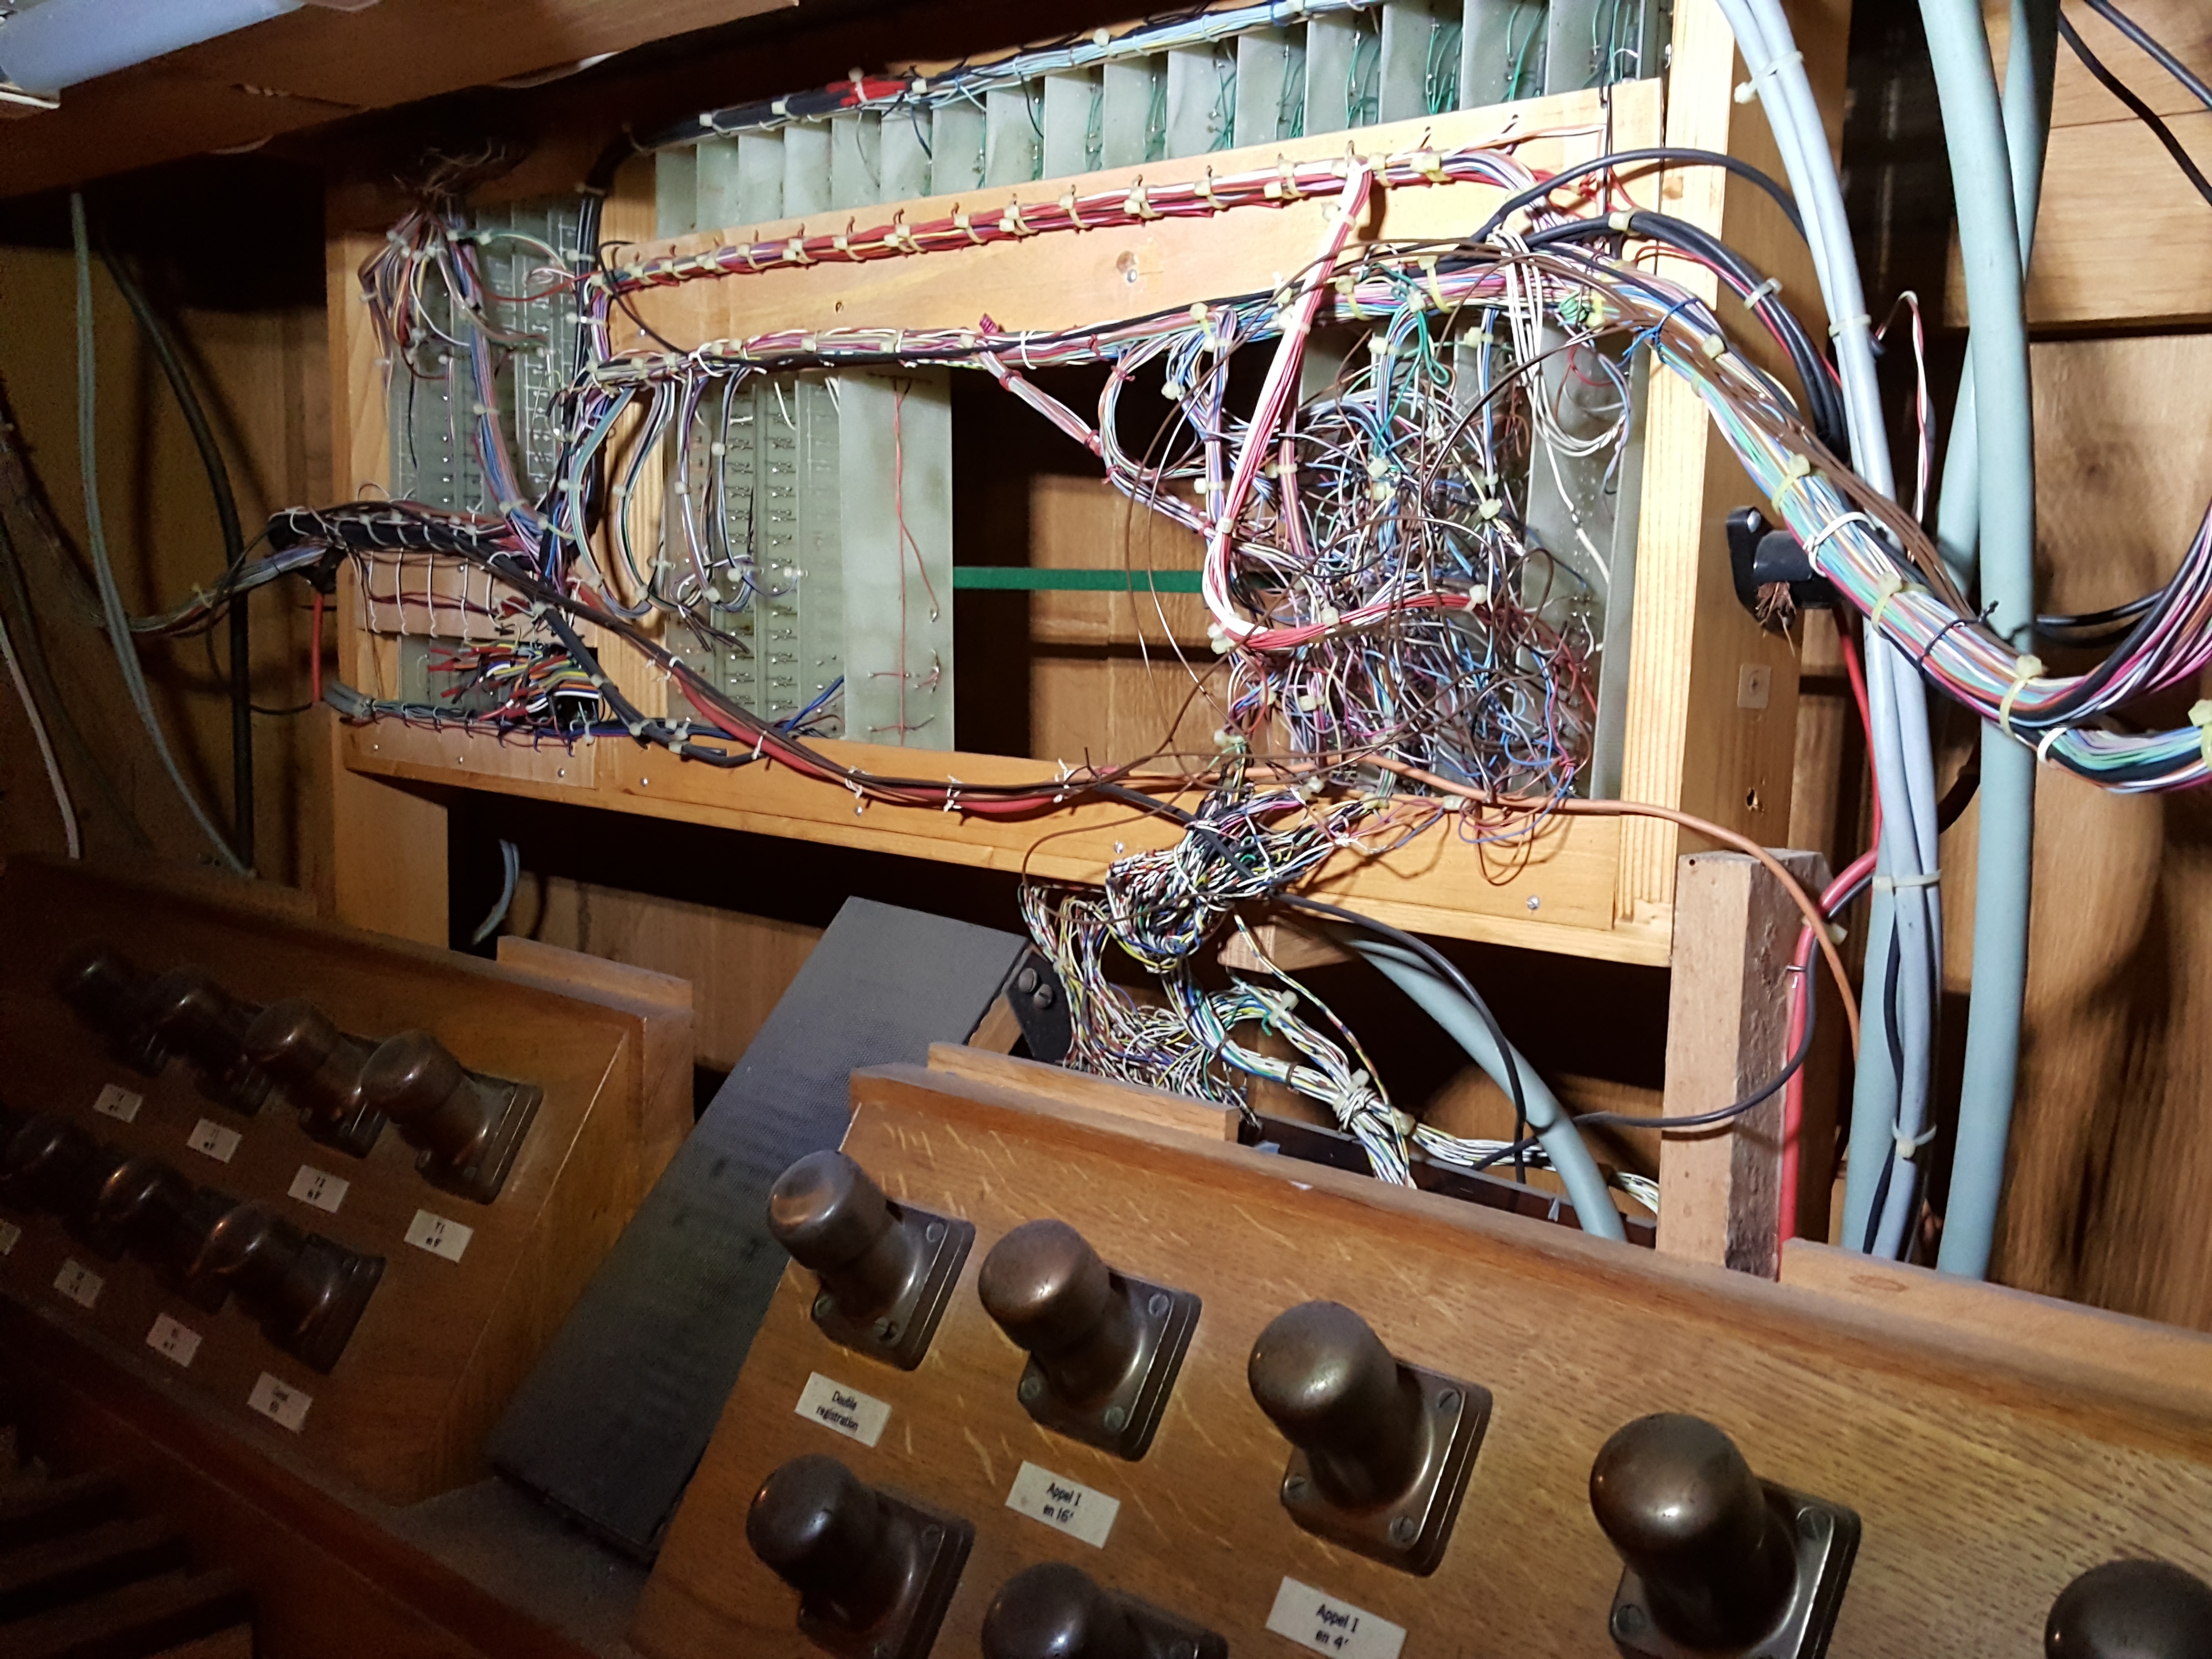 How to update old electrical systems